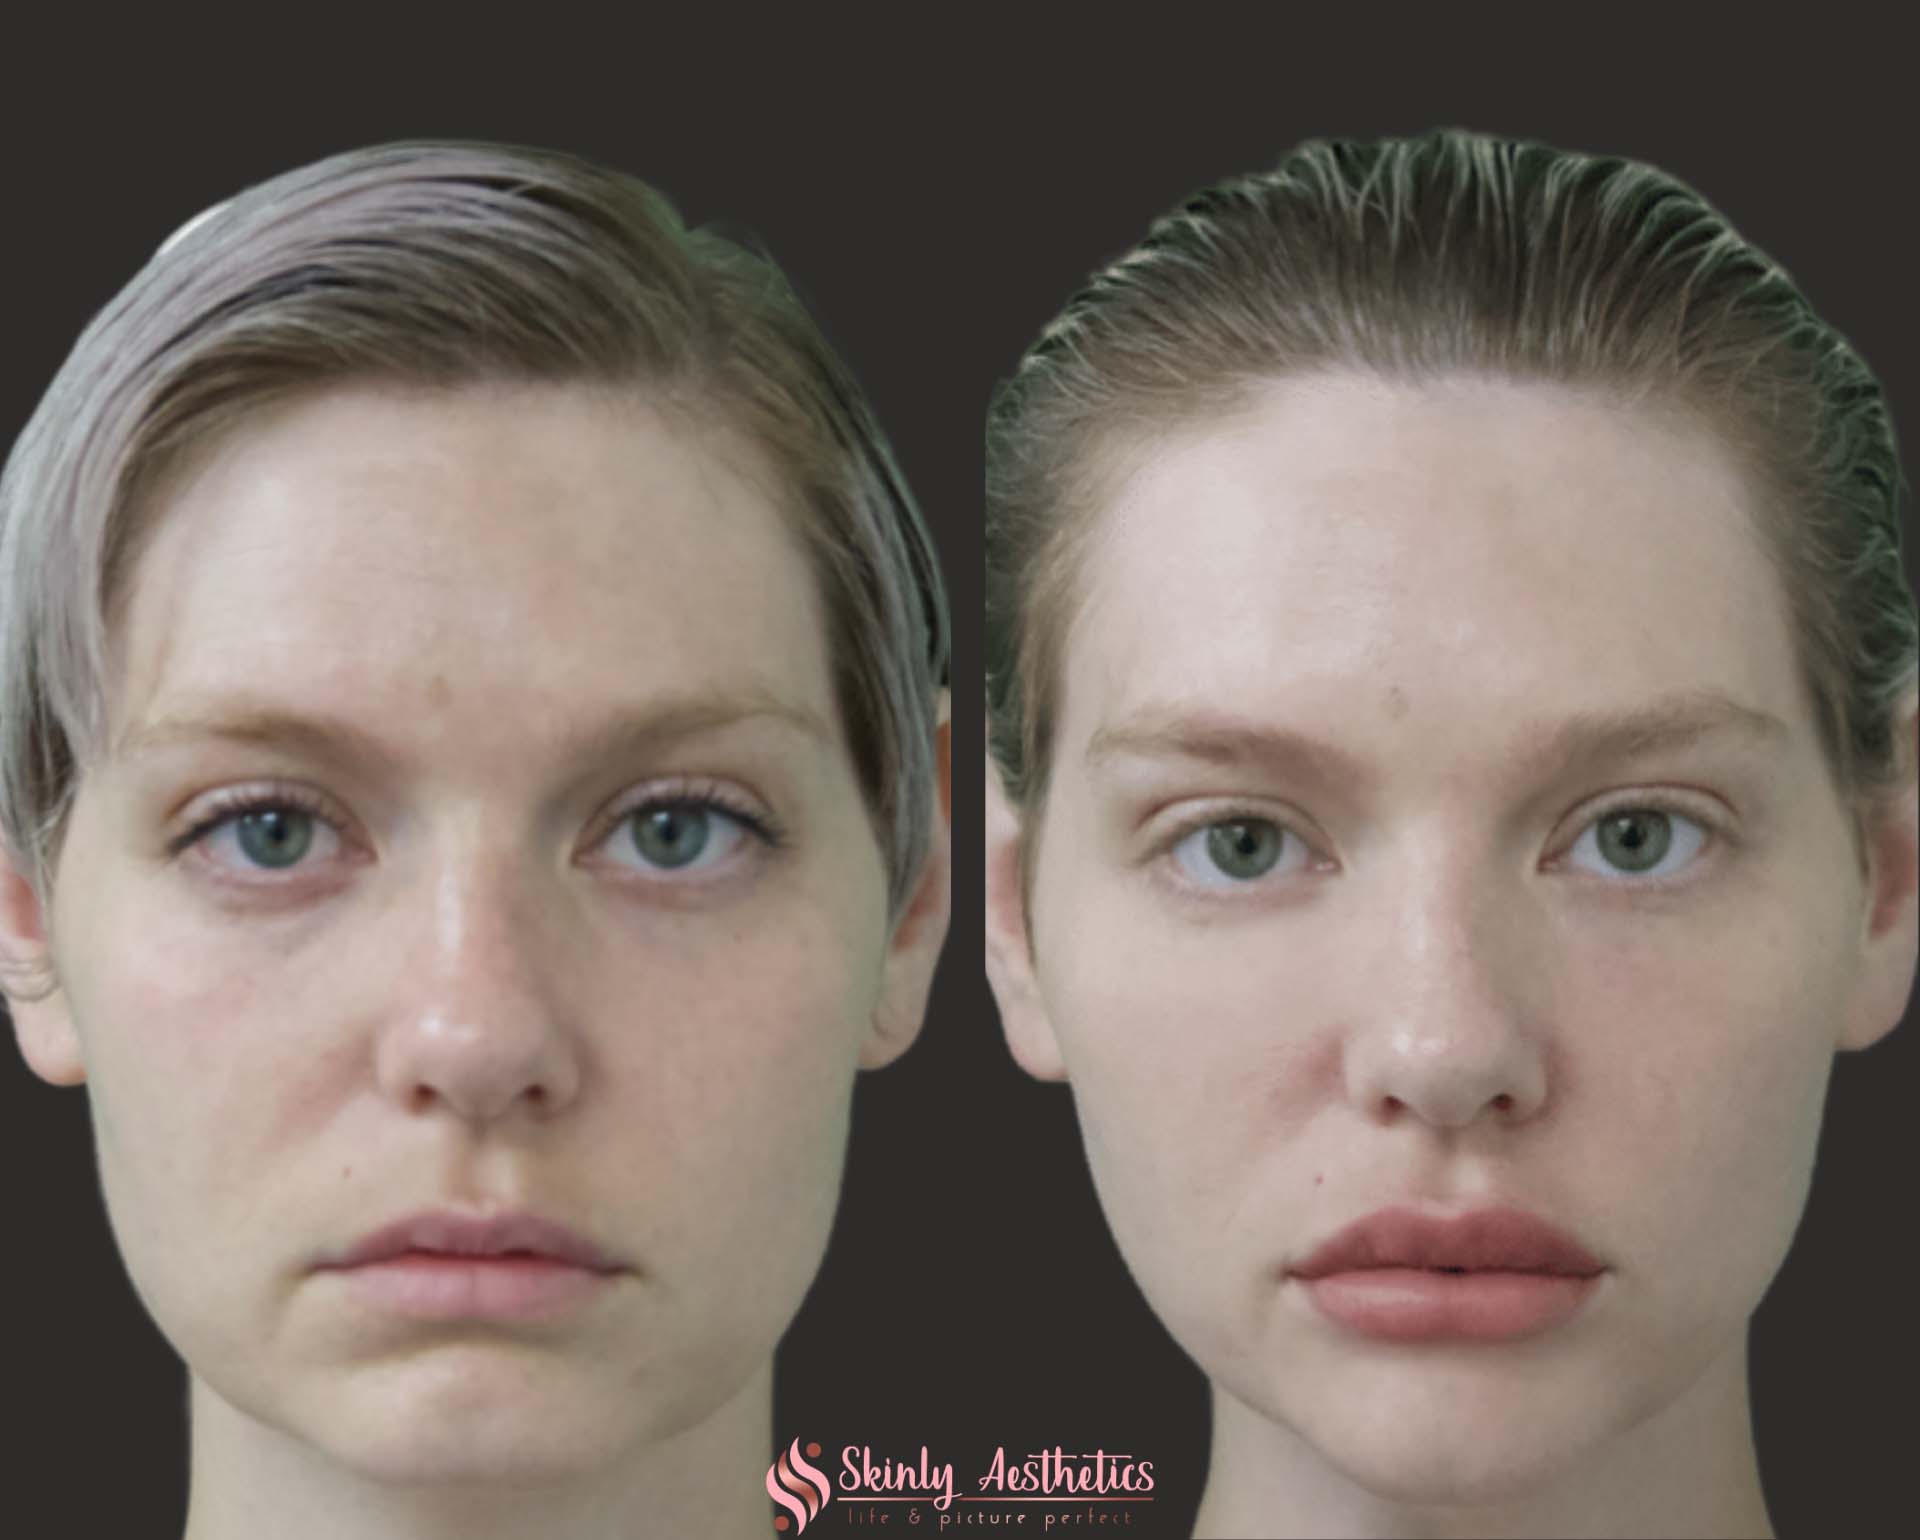 before and after results following Juvederm ultra lip augmentation